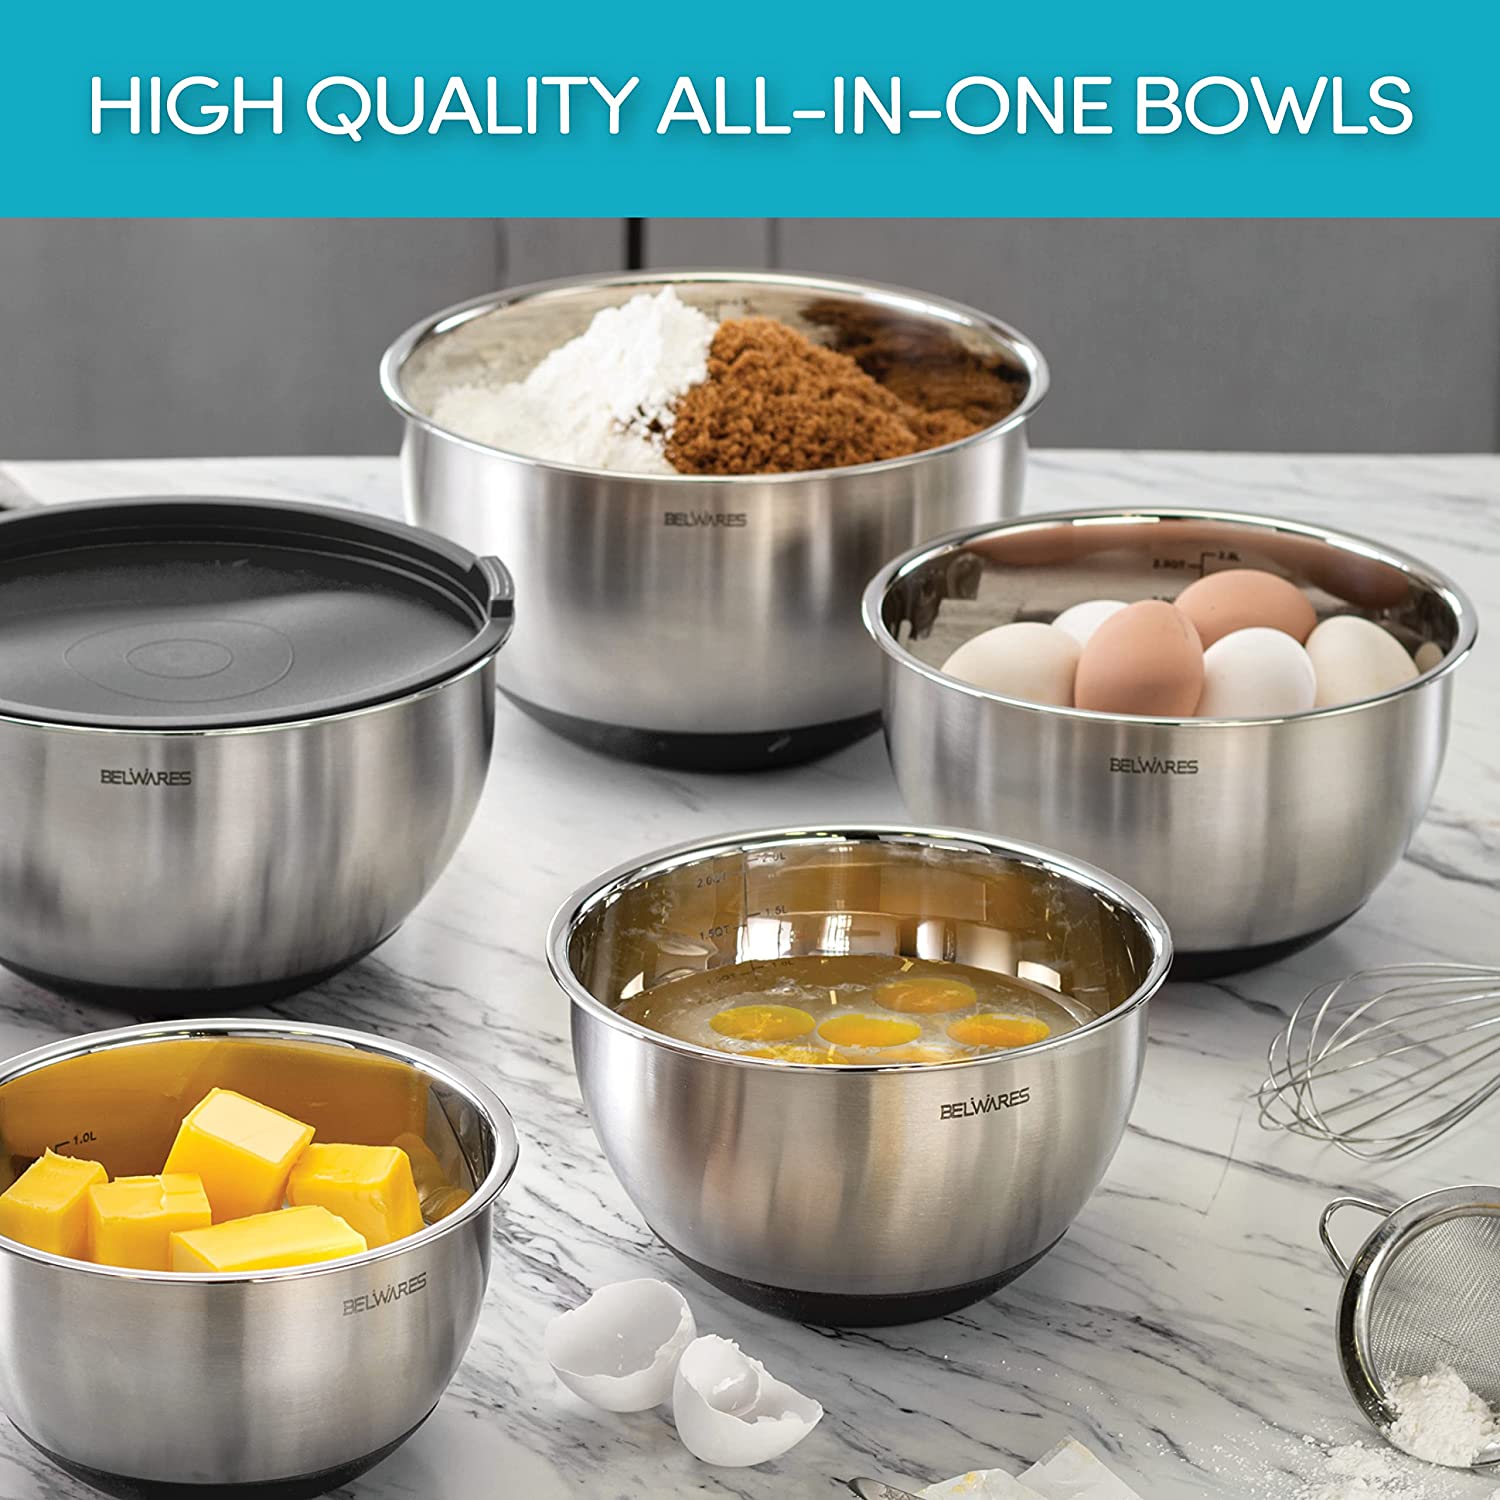 https://bigbigmart.com/wp-content/uploads/2023/03/Belwares-Mixing-Bowls-with-Lids-Set-%E2%80%93-Stainless-Steel-Mixing-Bowl-Set-Including-Airtight-Lids-and-Graters-%E2%80%93-Stainless-Steel-Bowls-that-Nest-%E2%80%93-5-Non-Slip-Metal-Bowls-for-Kitchen-with-Pour-Spouts1.jpg